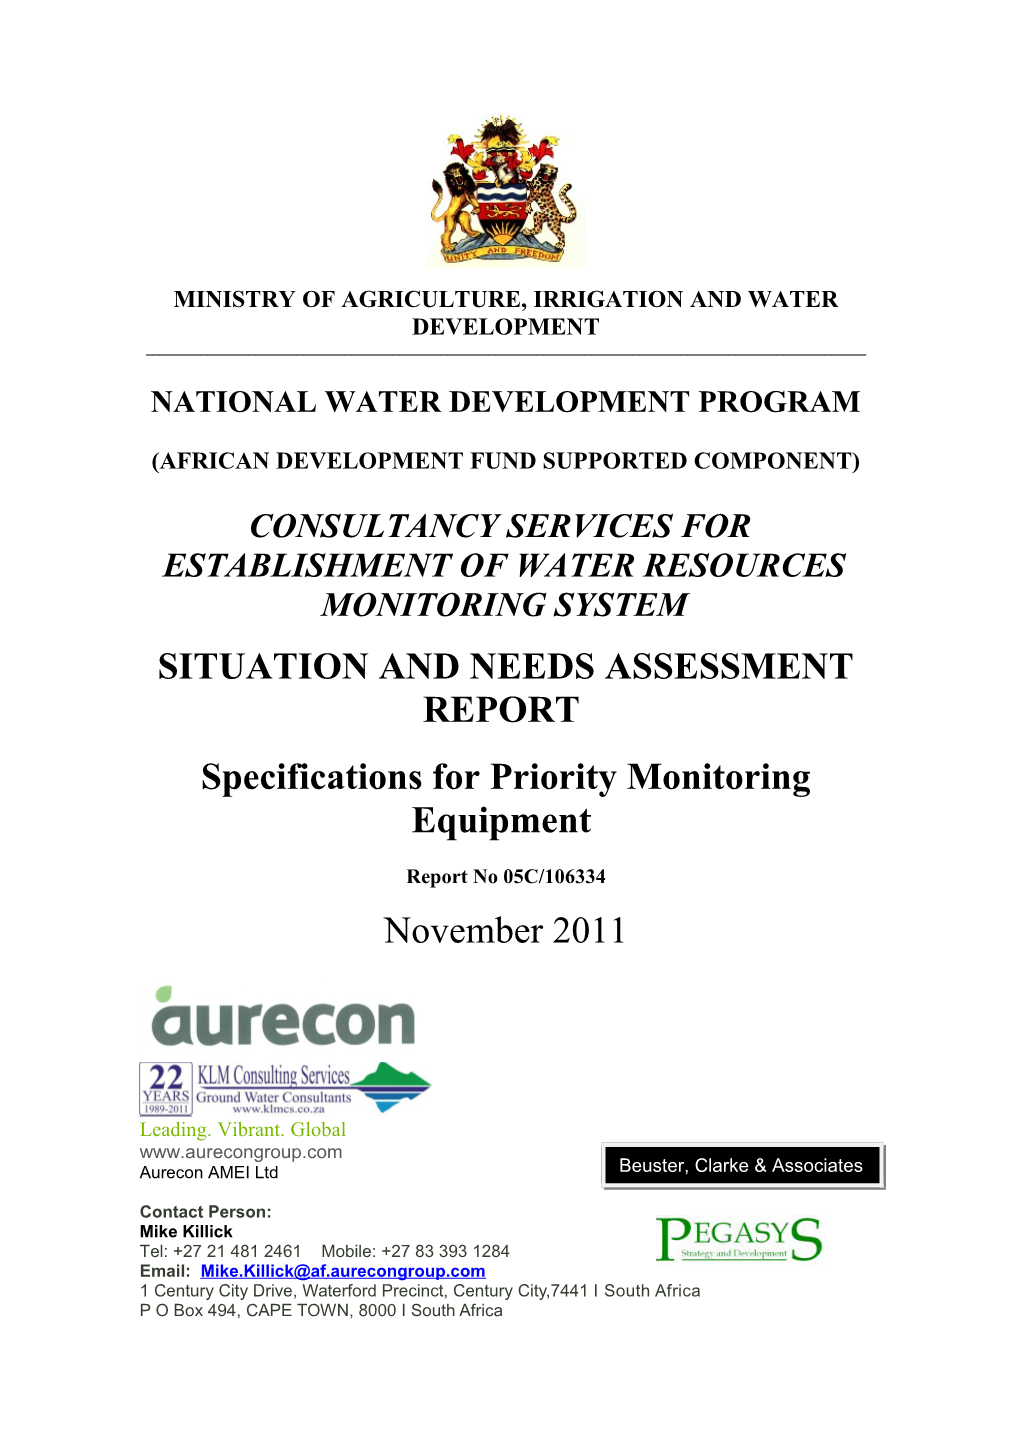 Ministry of Agriculture, Irrigation and Water Development